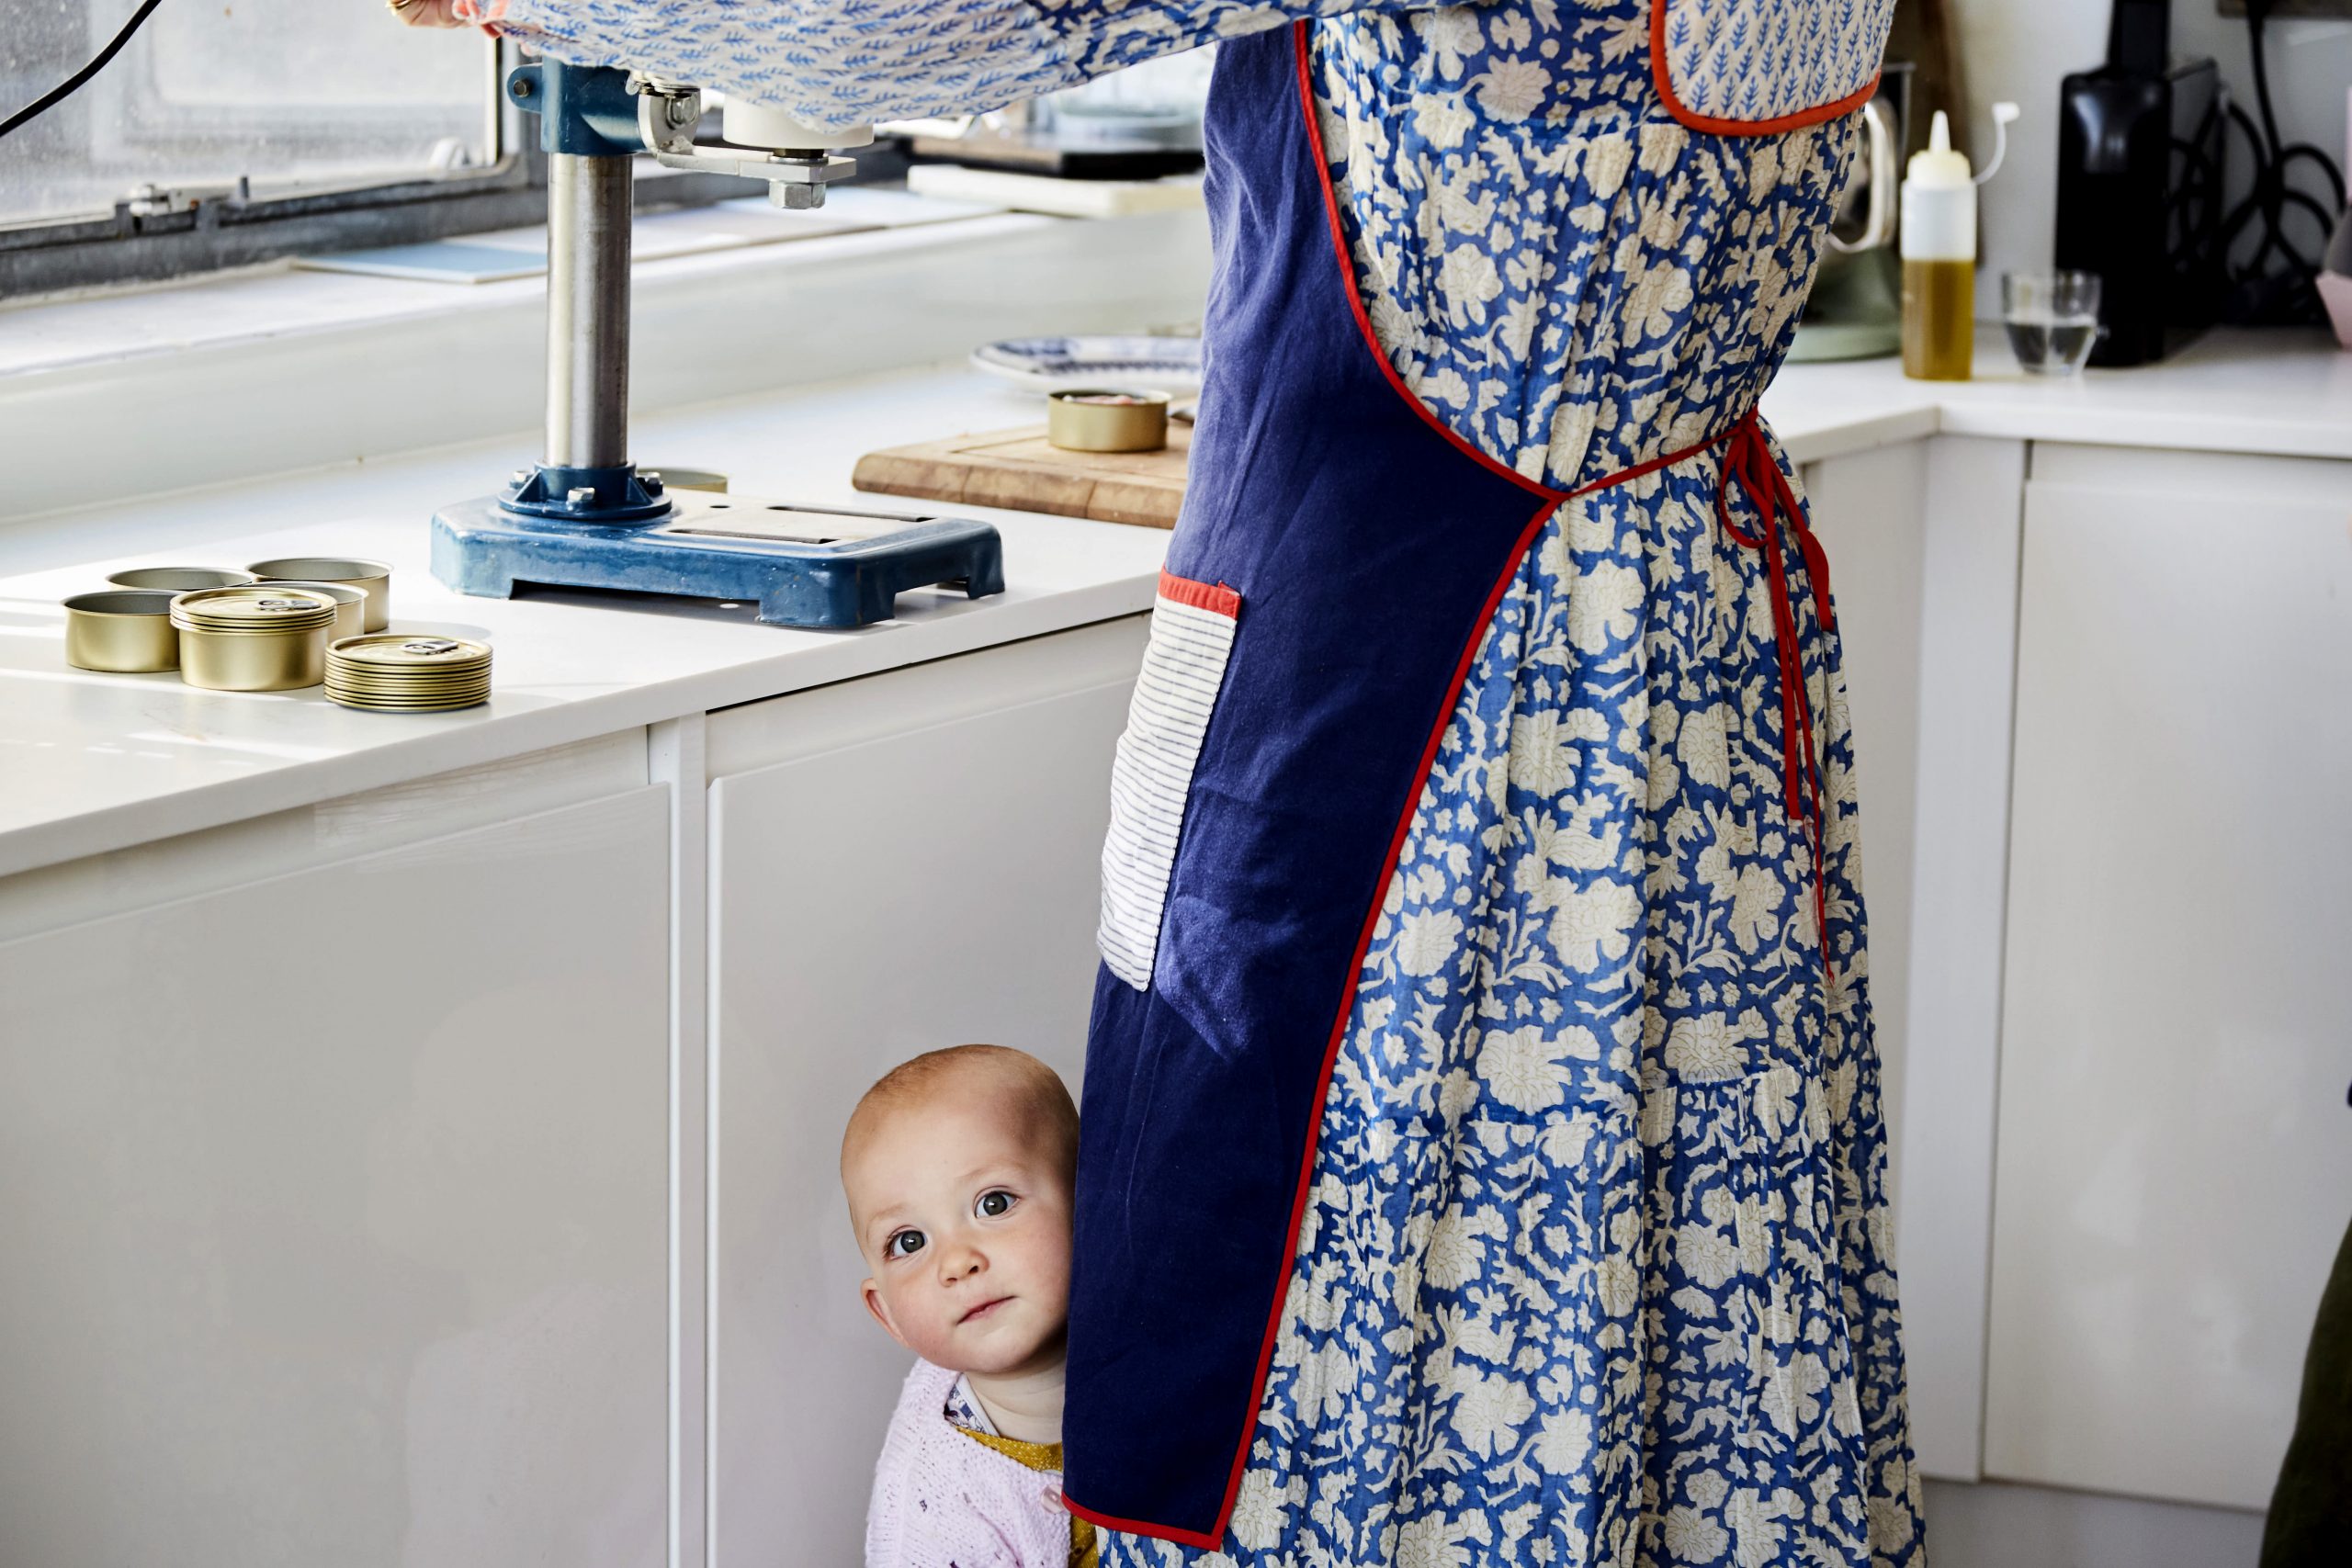 Daughter of Sea Sisters founders peeks out from behind an apron